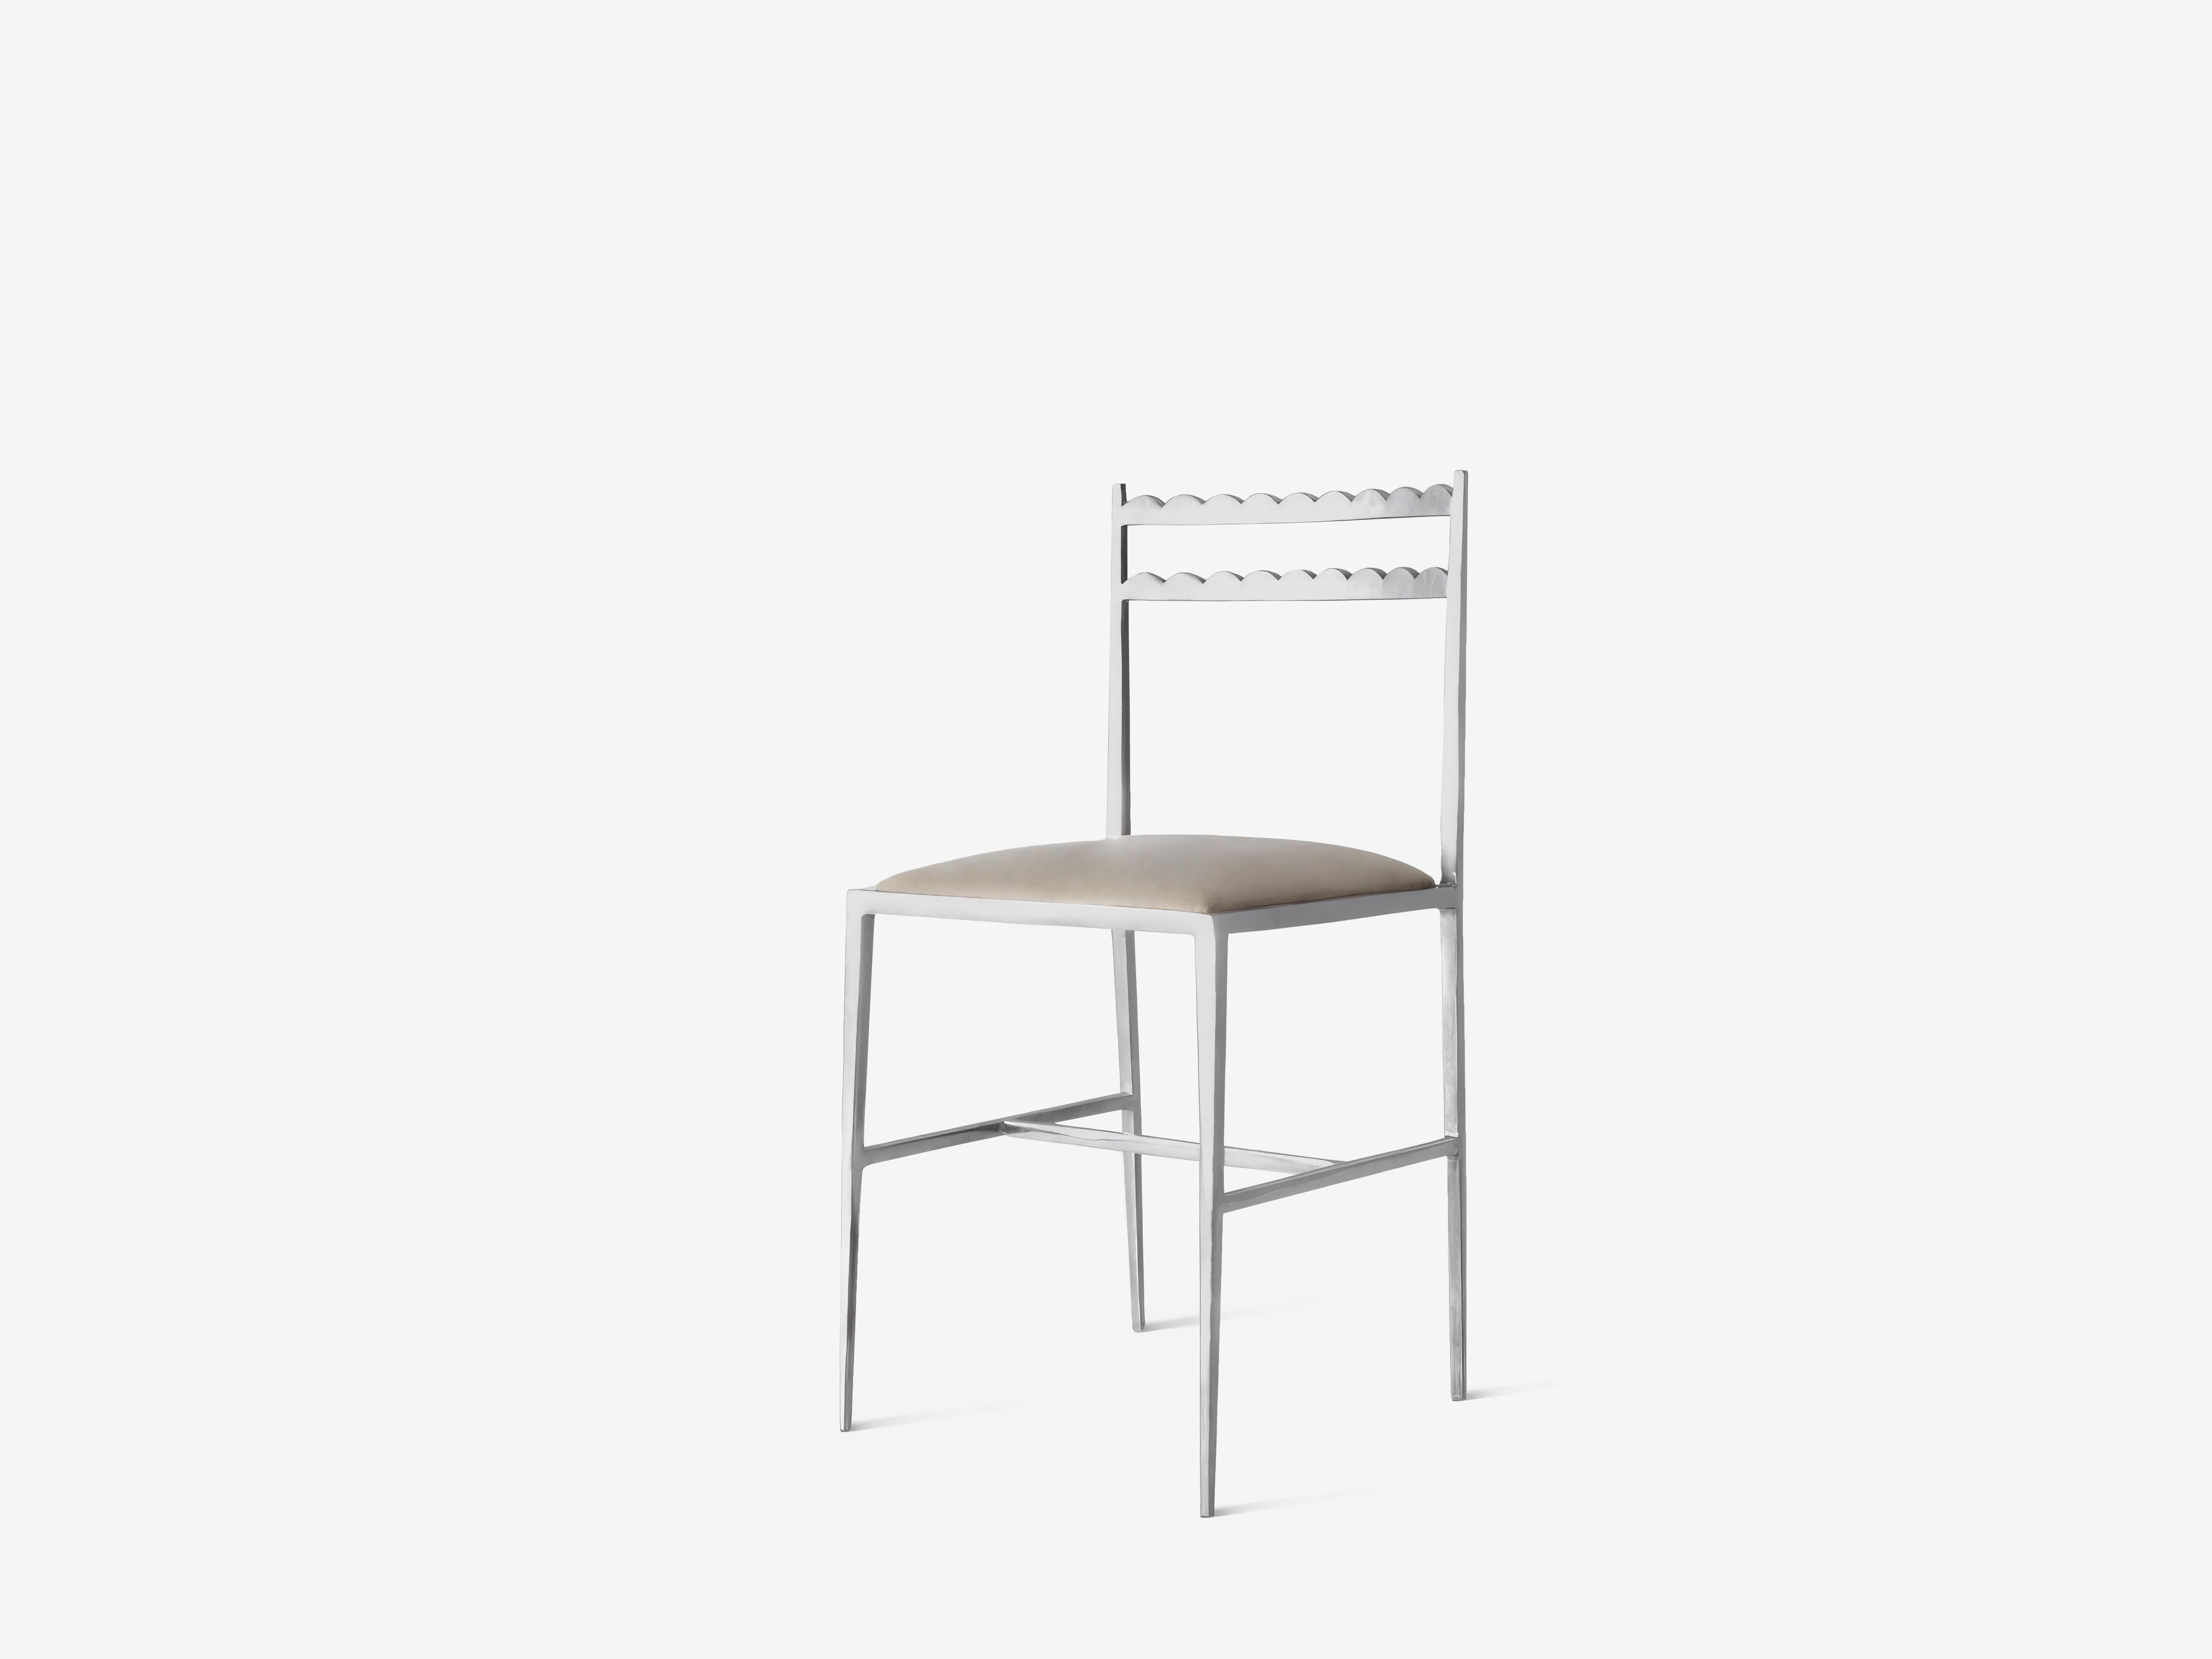 Lupita Dining Chair by OHLA STUDIO
Dimensions: D 40 x W 40 x H 83 cm 
Materials: Polished Aluminum.
8.5 kg

This chair is inspired by the traditional 19th-century Mexican scallop carved benches that furnish the courtyard of small colonial churches